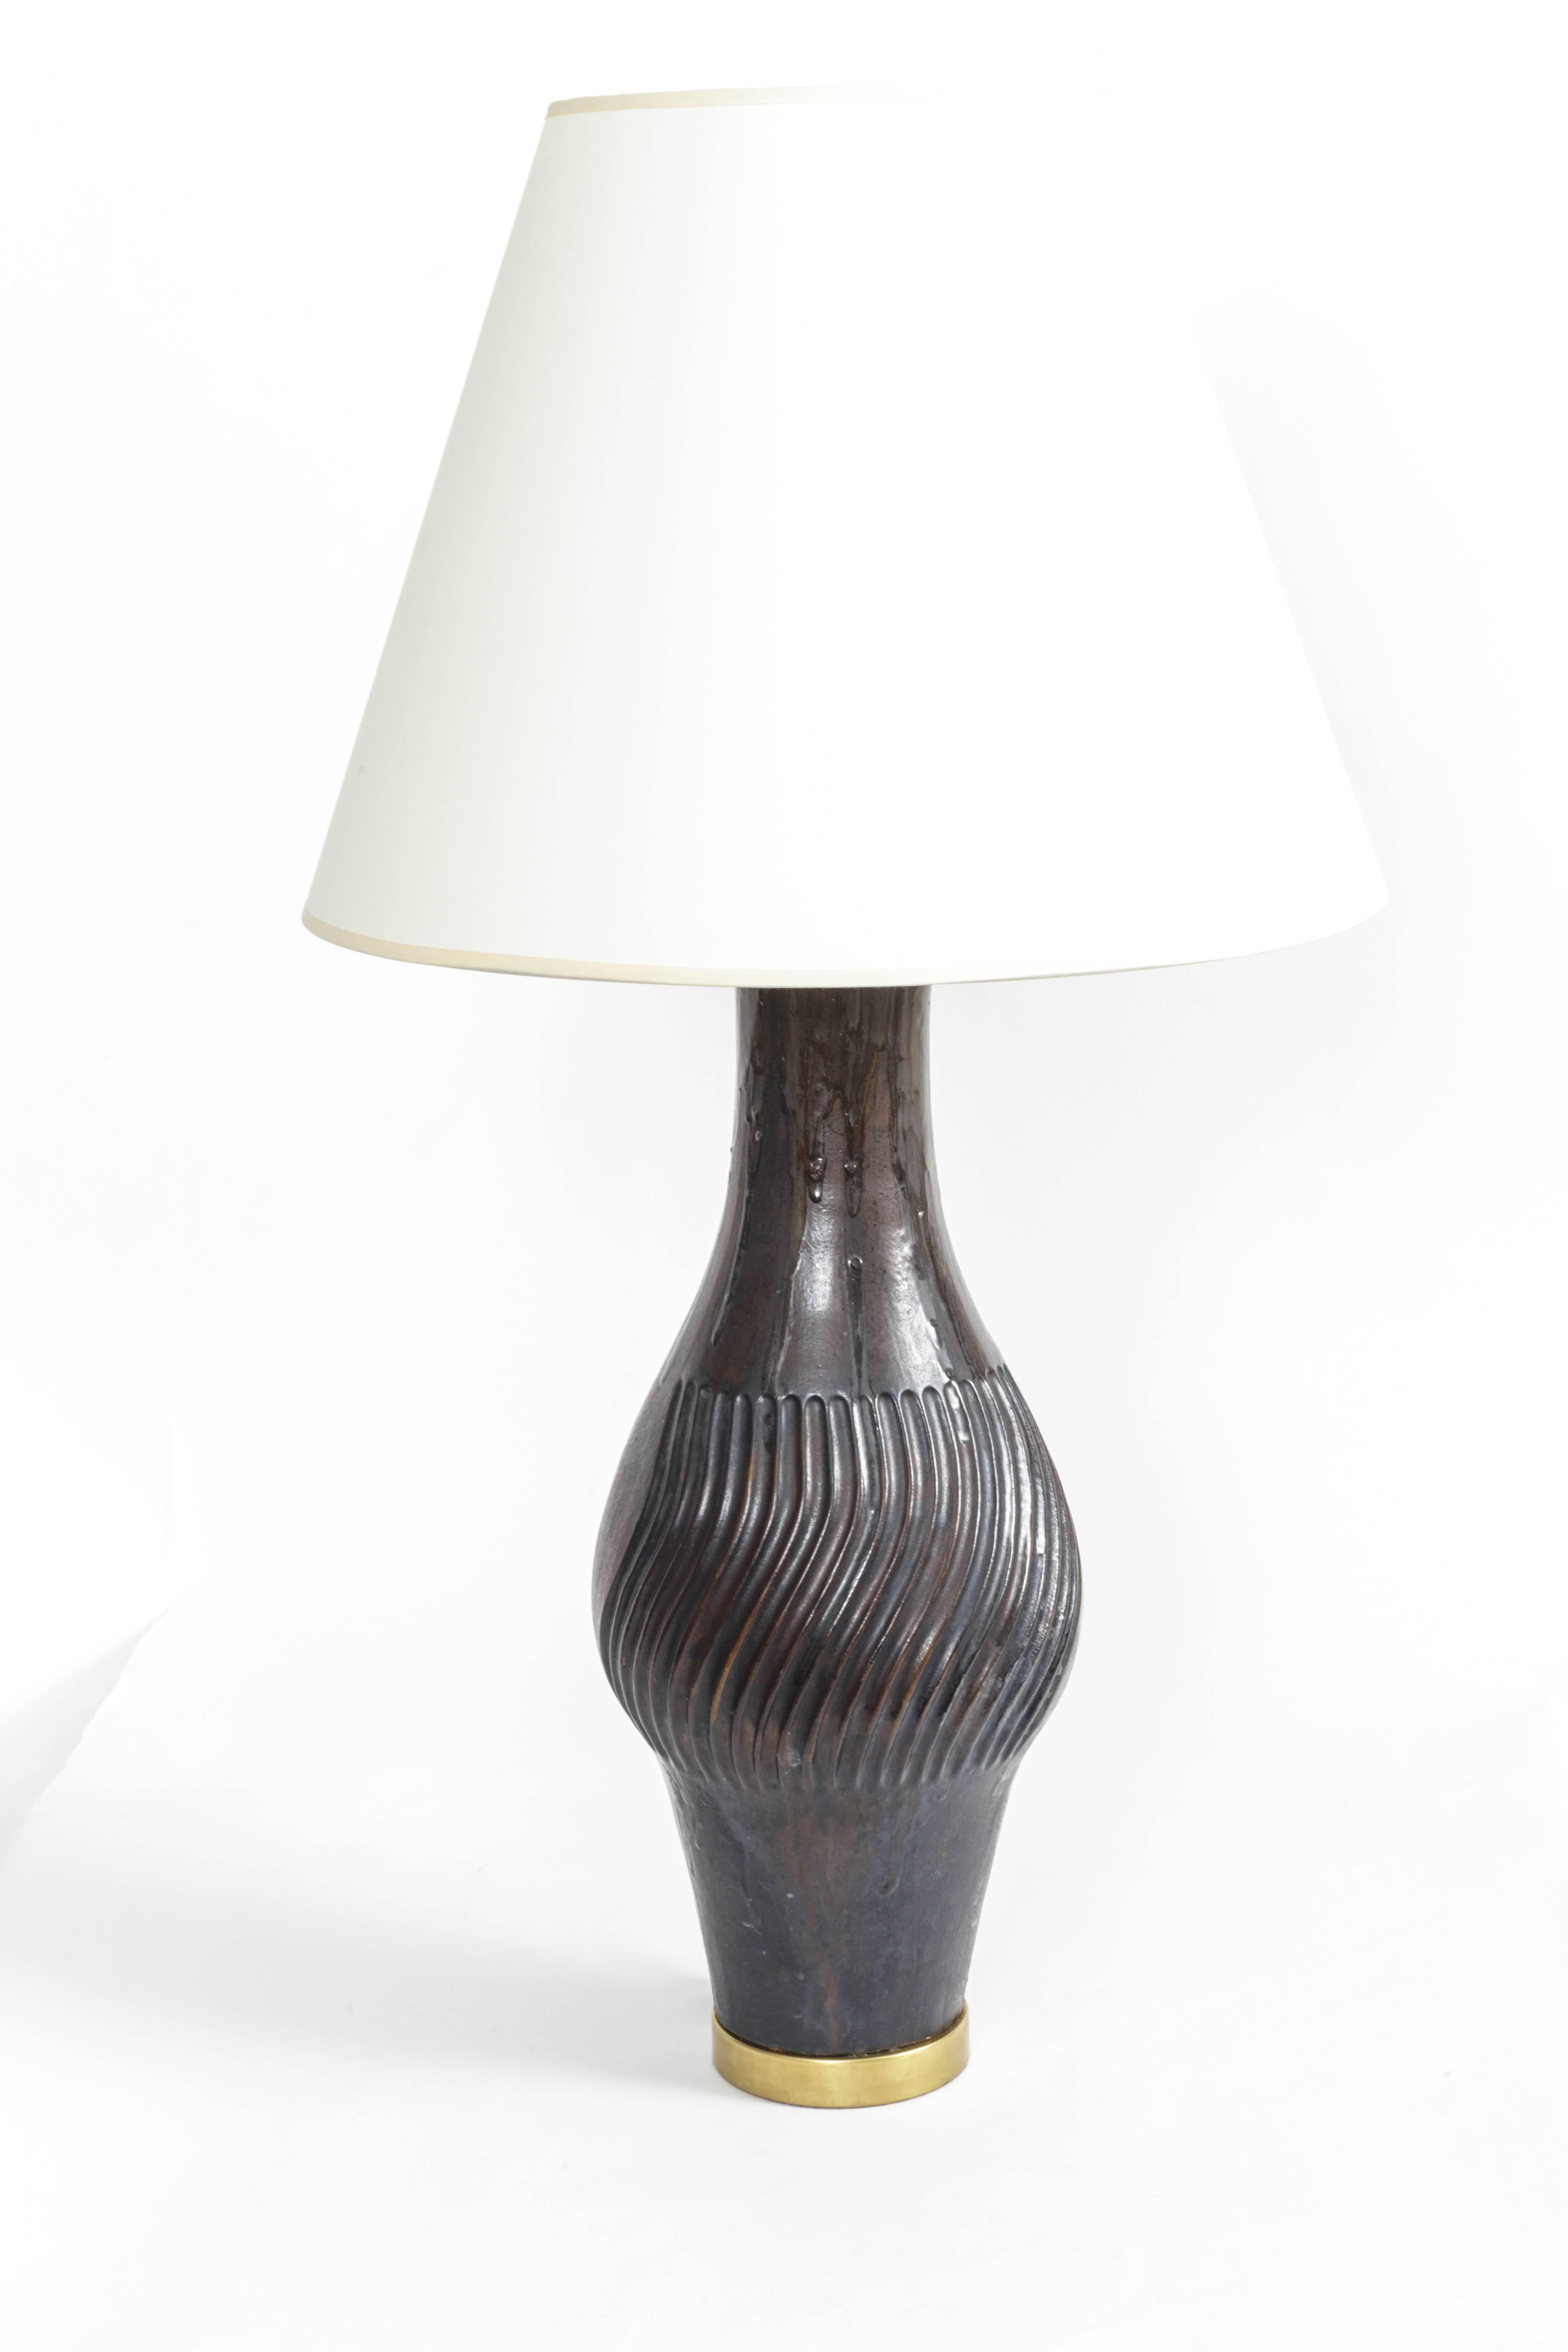 Mid-20th Century Large Ceramic and Brass Table Lamp by Marcello Fantoni, Italy, 1958 For Sale